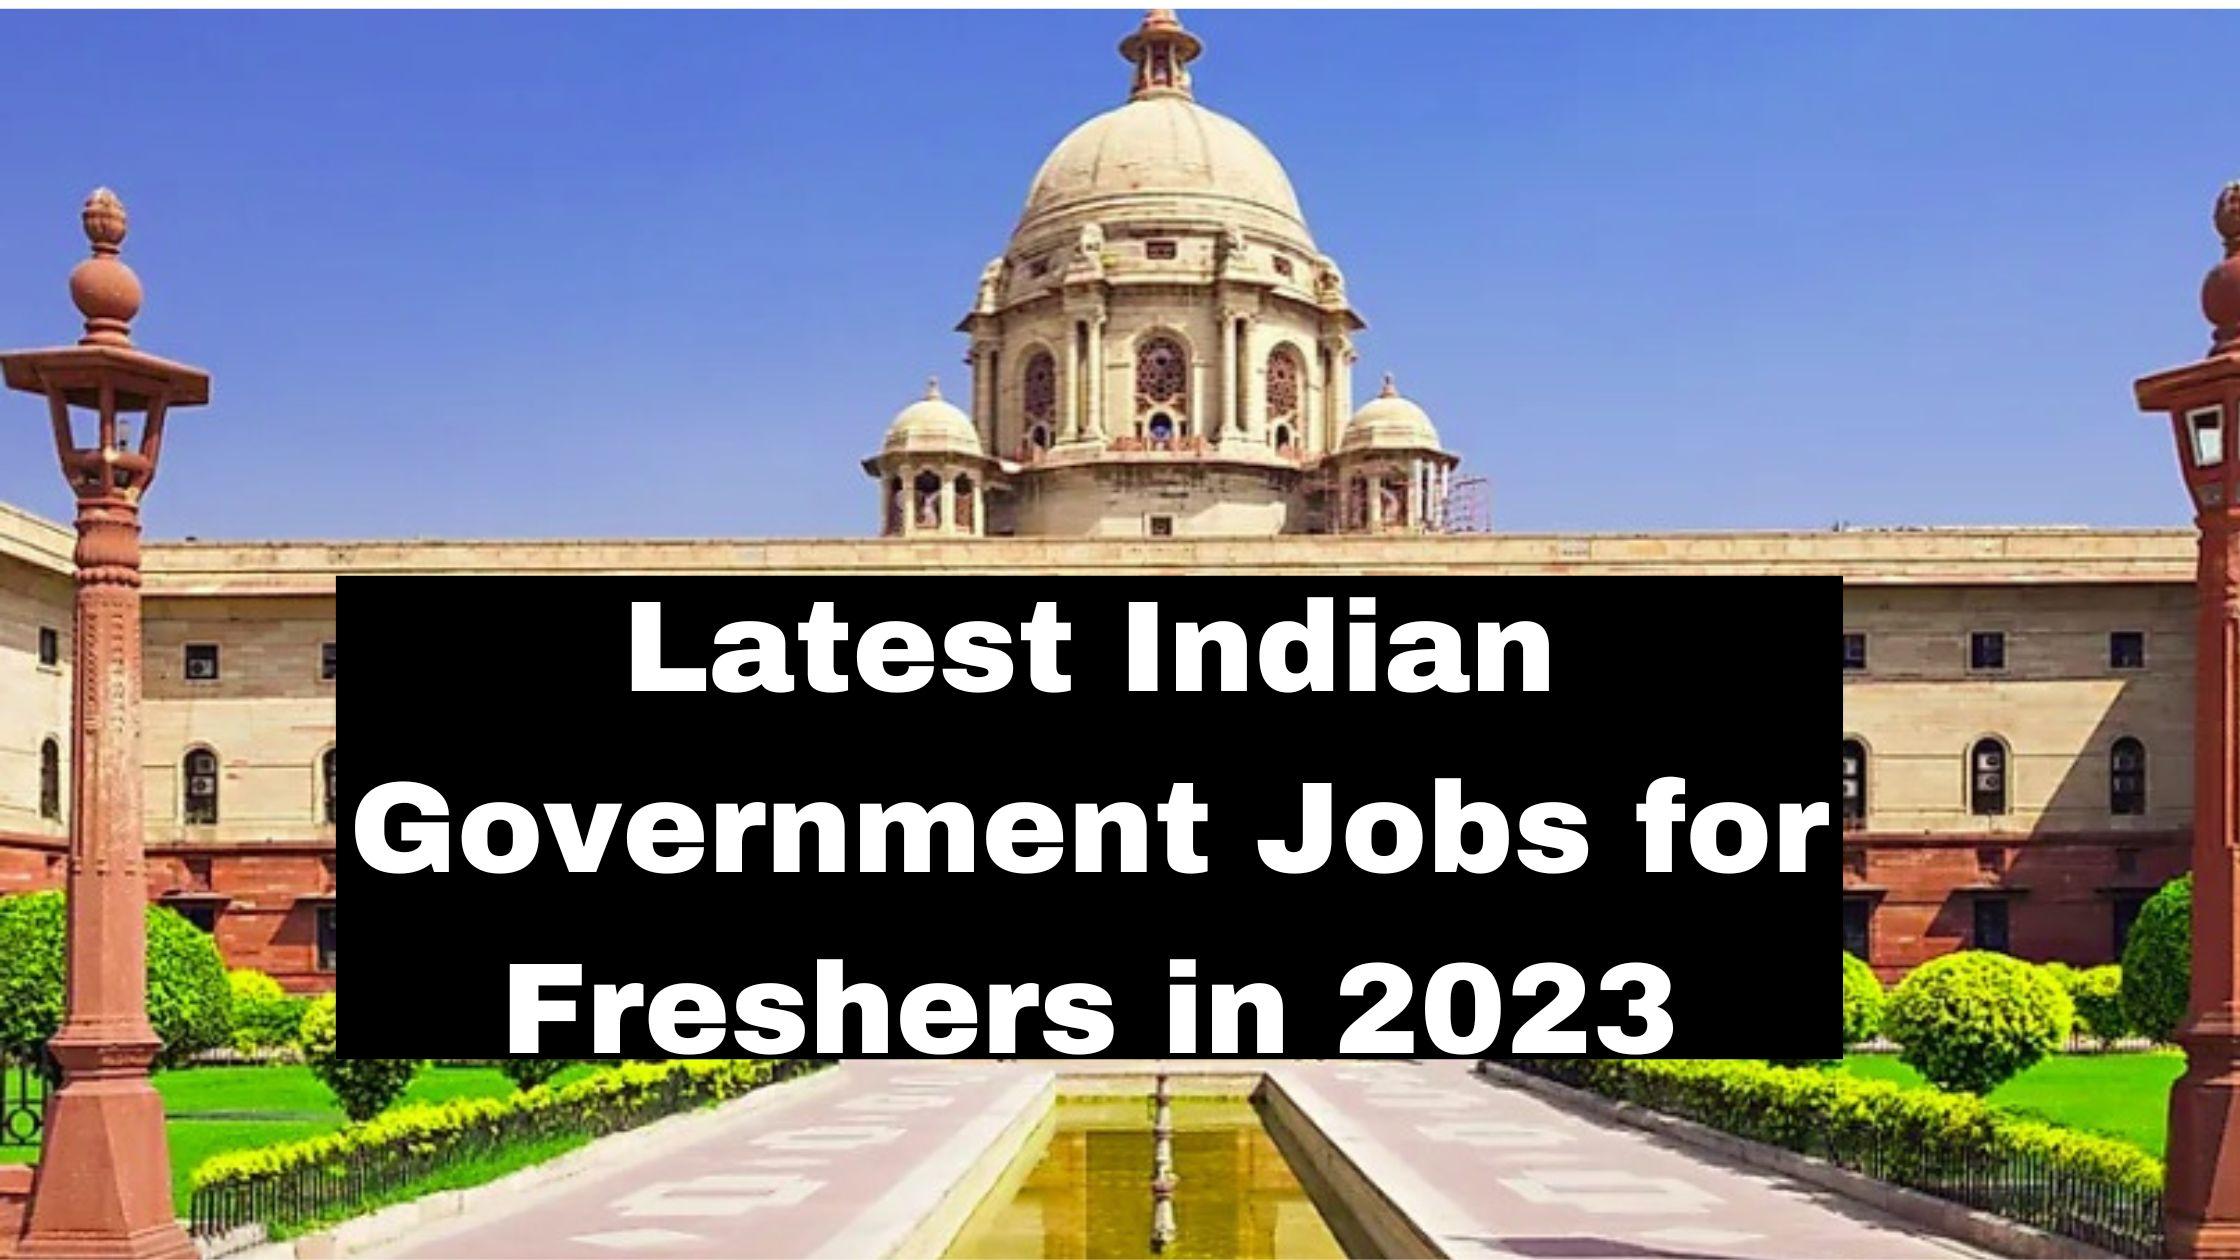 Latest Indian Government Jobs for Freshers in 2023